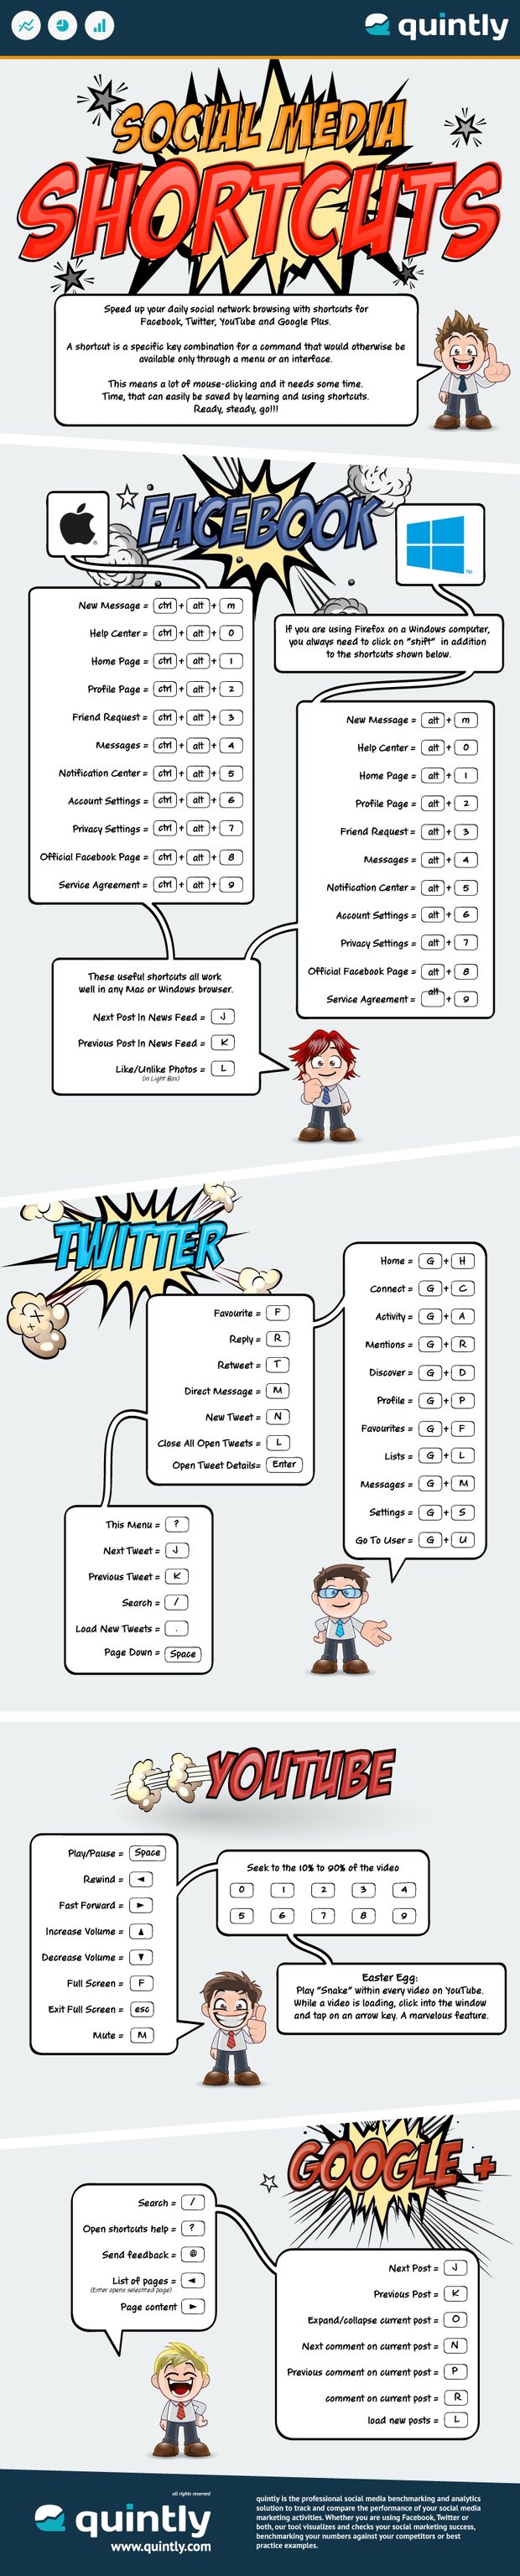 quintly Infographic: Social media shortcuts